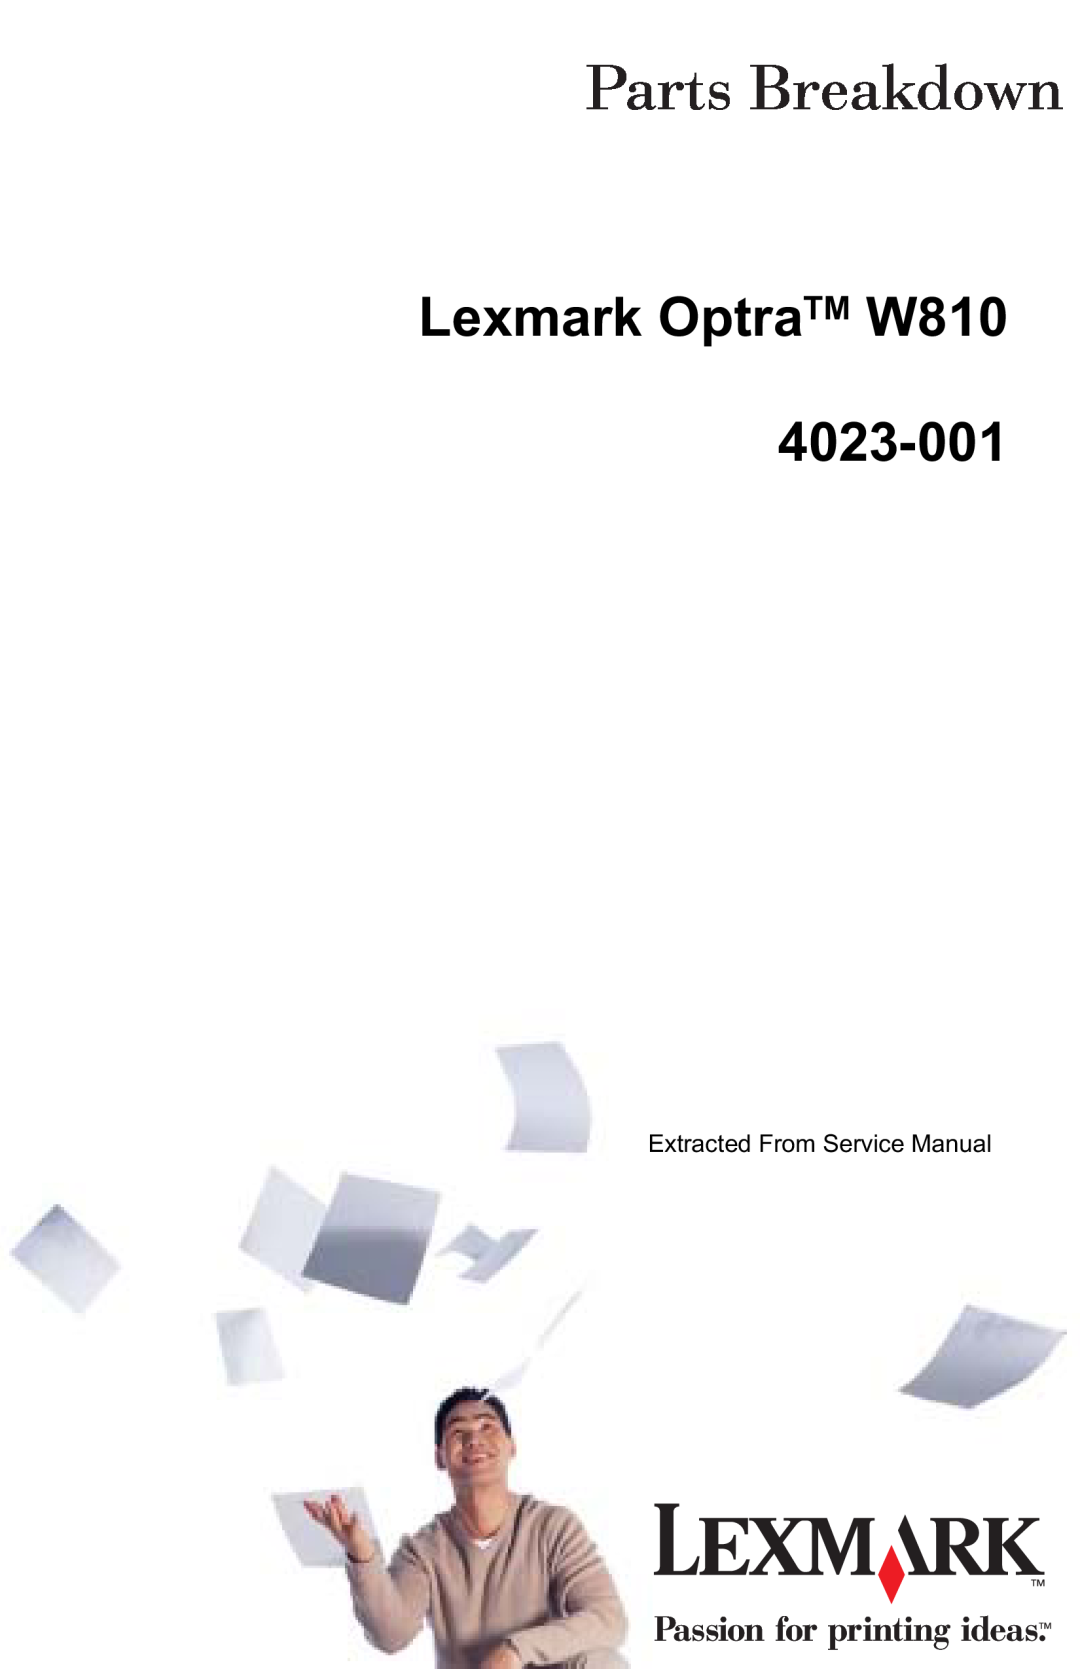 Lexmark service manual Lexmark OptraTM W810 4023-001, Extracted From Service Manual 